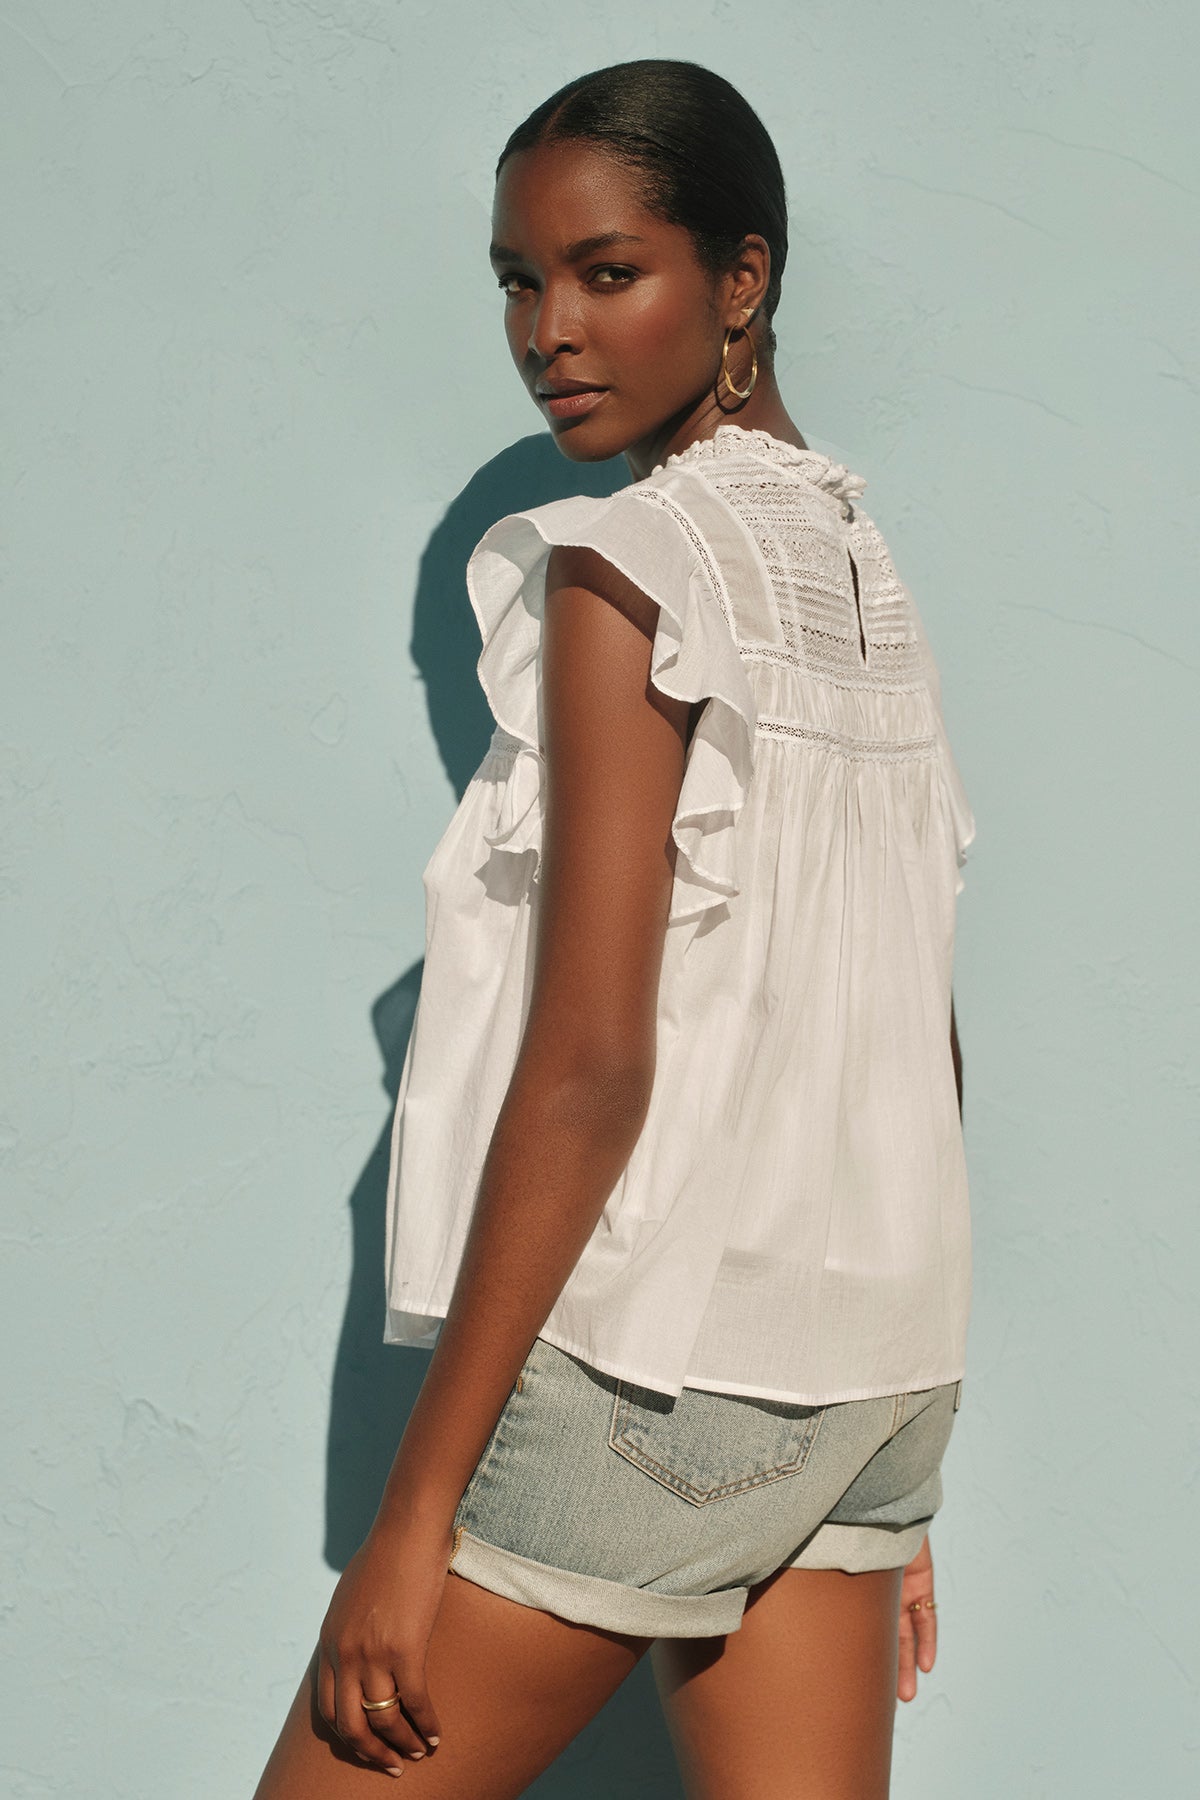 A person in the INESSA COTTON LACE TOP by Velvet by Graham & Spencer and denim shorts stands against a light blue textured wall, looking over their shoulder.-37618550669505